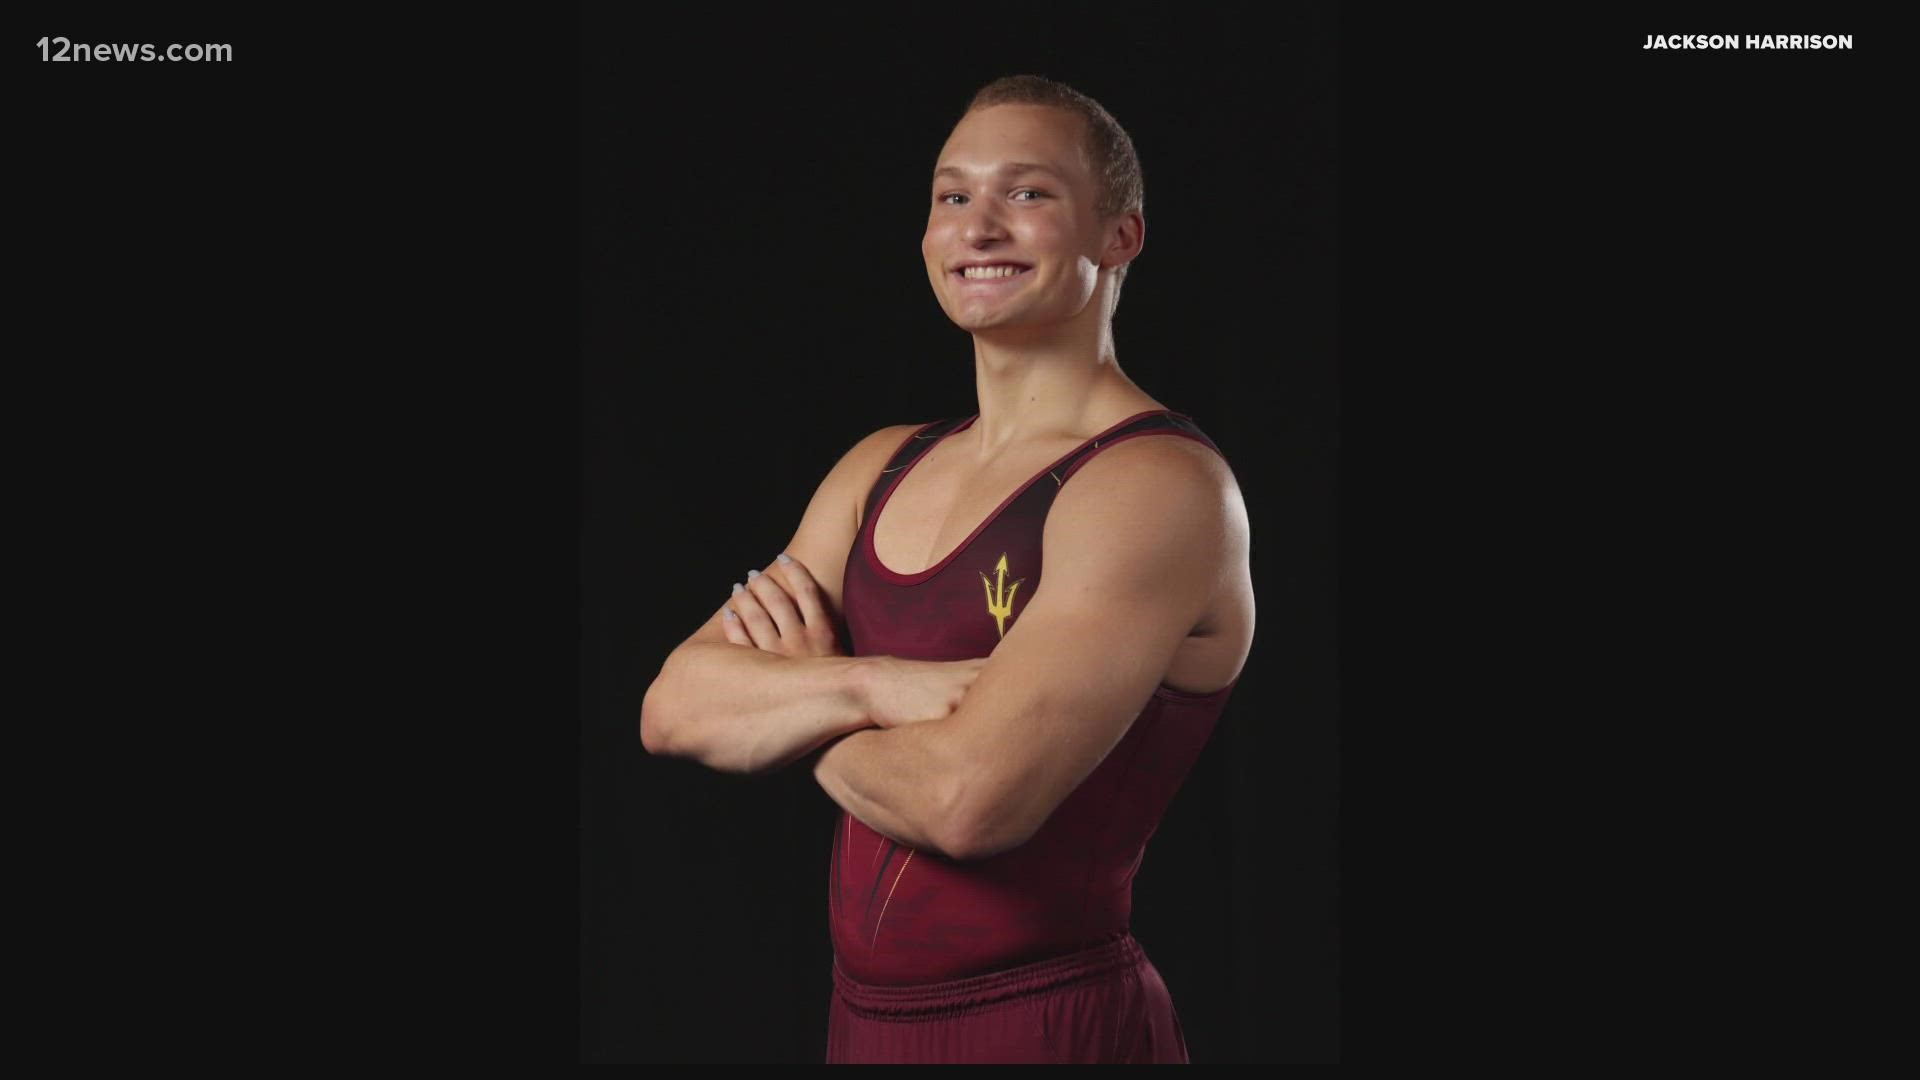 ASU sophomore Jackson Harrison found their voice to express themselves with their Sun Devil teammates. Their story is one of acceptance and LGBTQ+ pride.